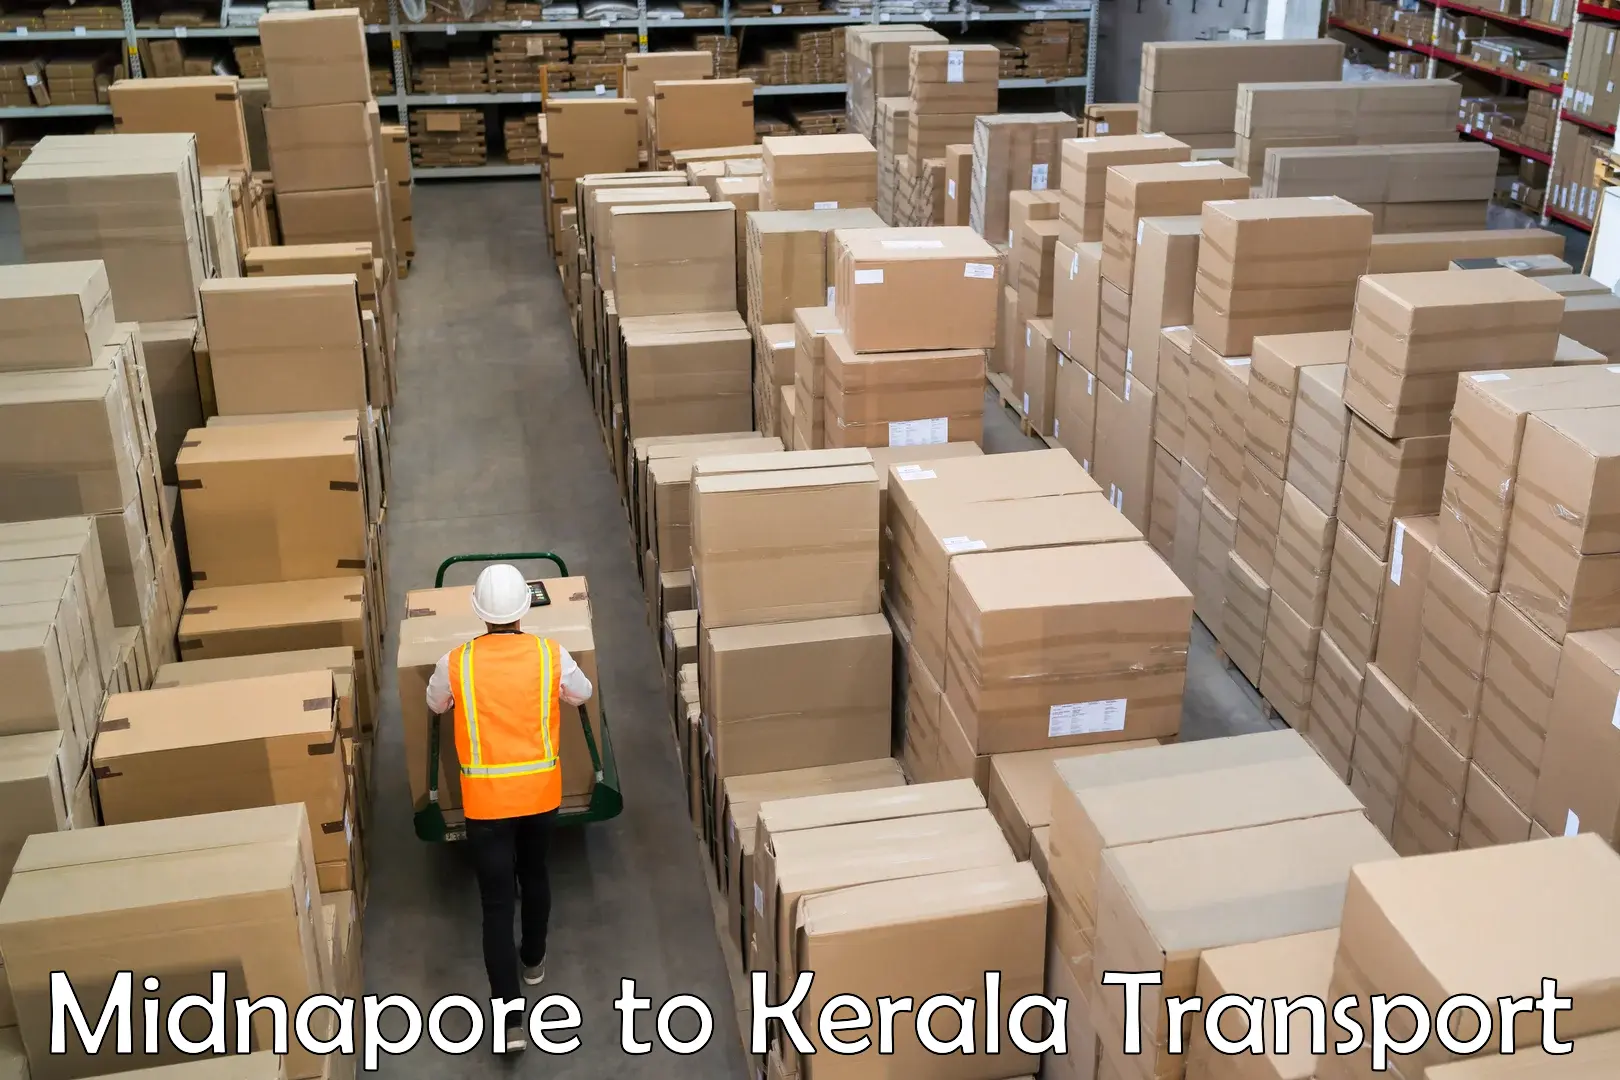 Express transport services Midnapore to Kochi